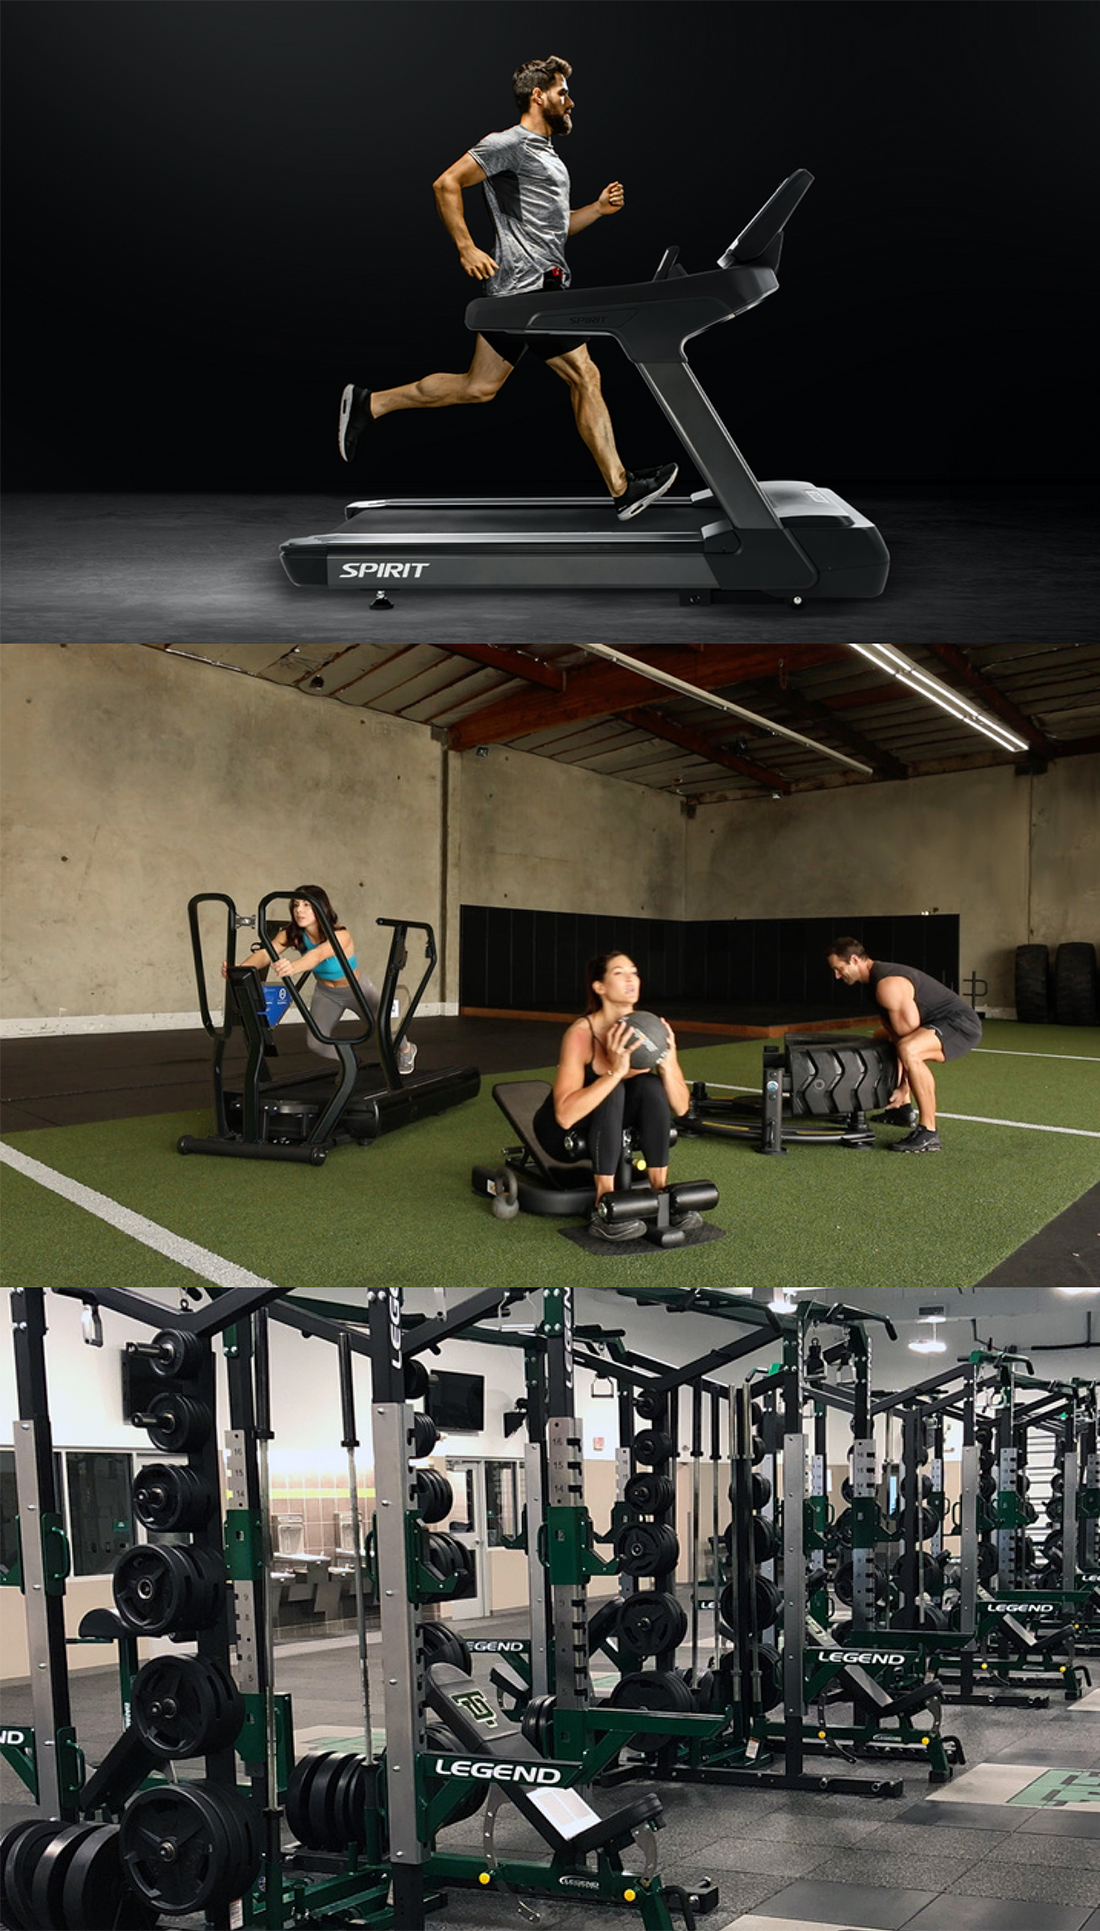 Spirit Fitness, The Ab Company and Legend Fitness - Innovating Fitness and Shaping the Future of Training